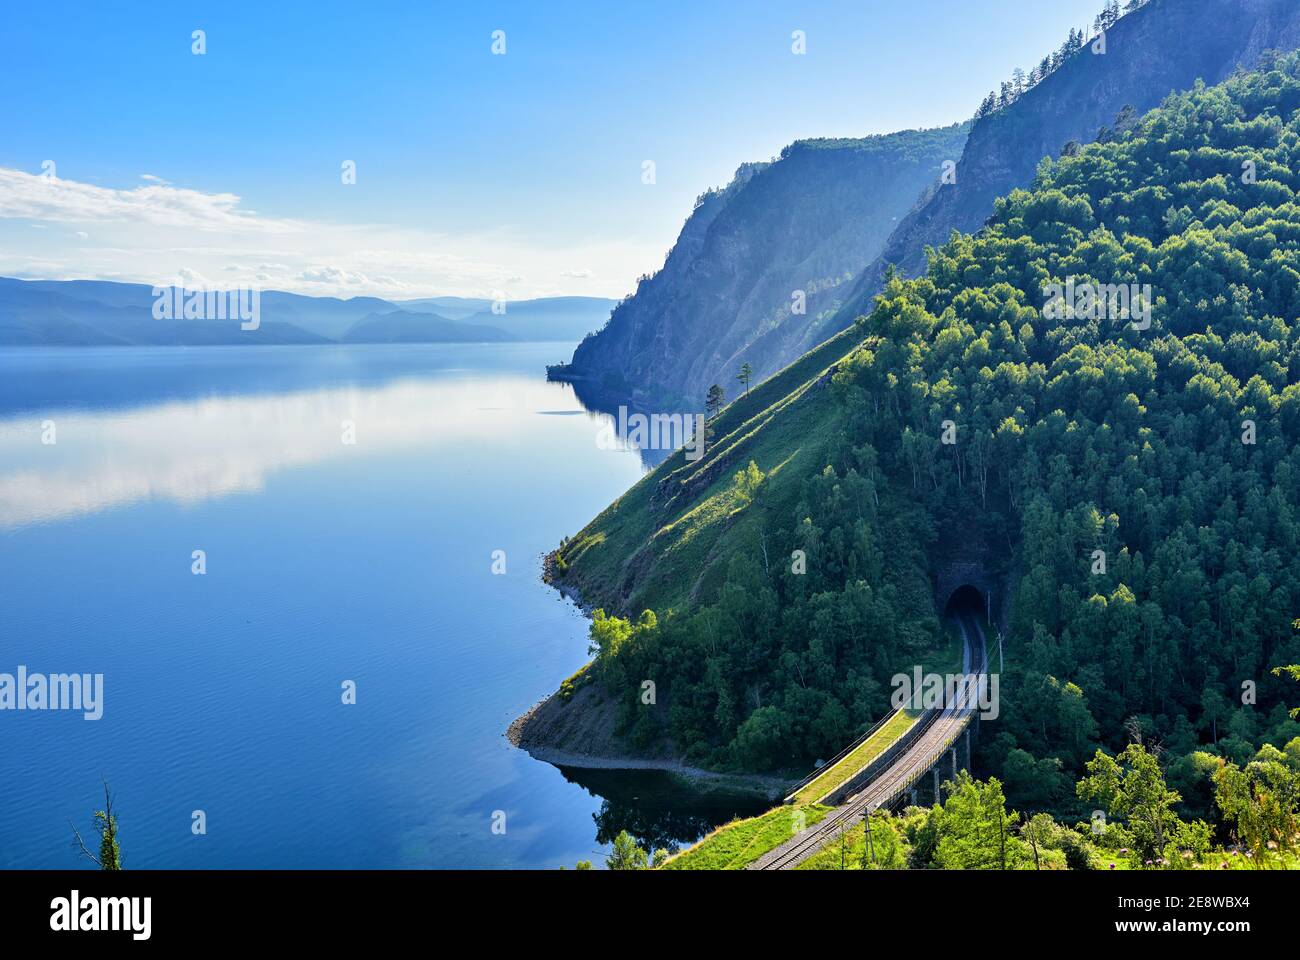 Calm on Lake Baikal. Large-scale top view of Lake Baikal and the section of the Circum-Baikal Railway at the Irkutsk portal of tunnel No. 33. In the b Stock Photo